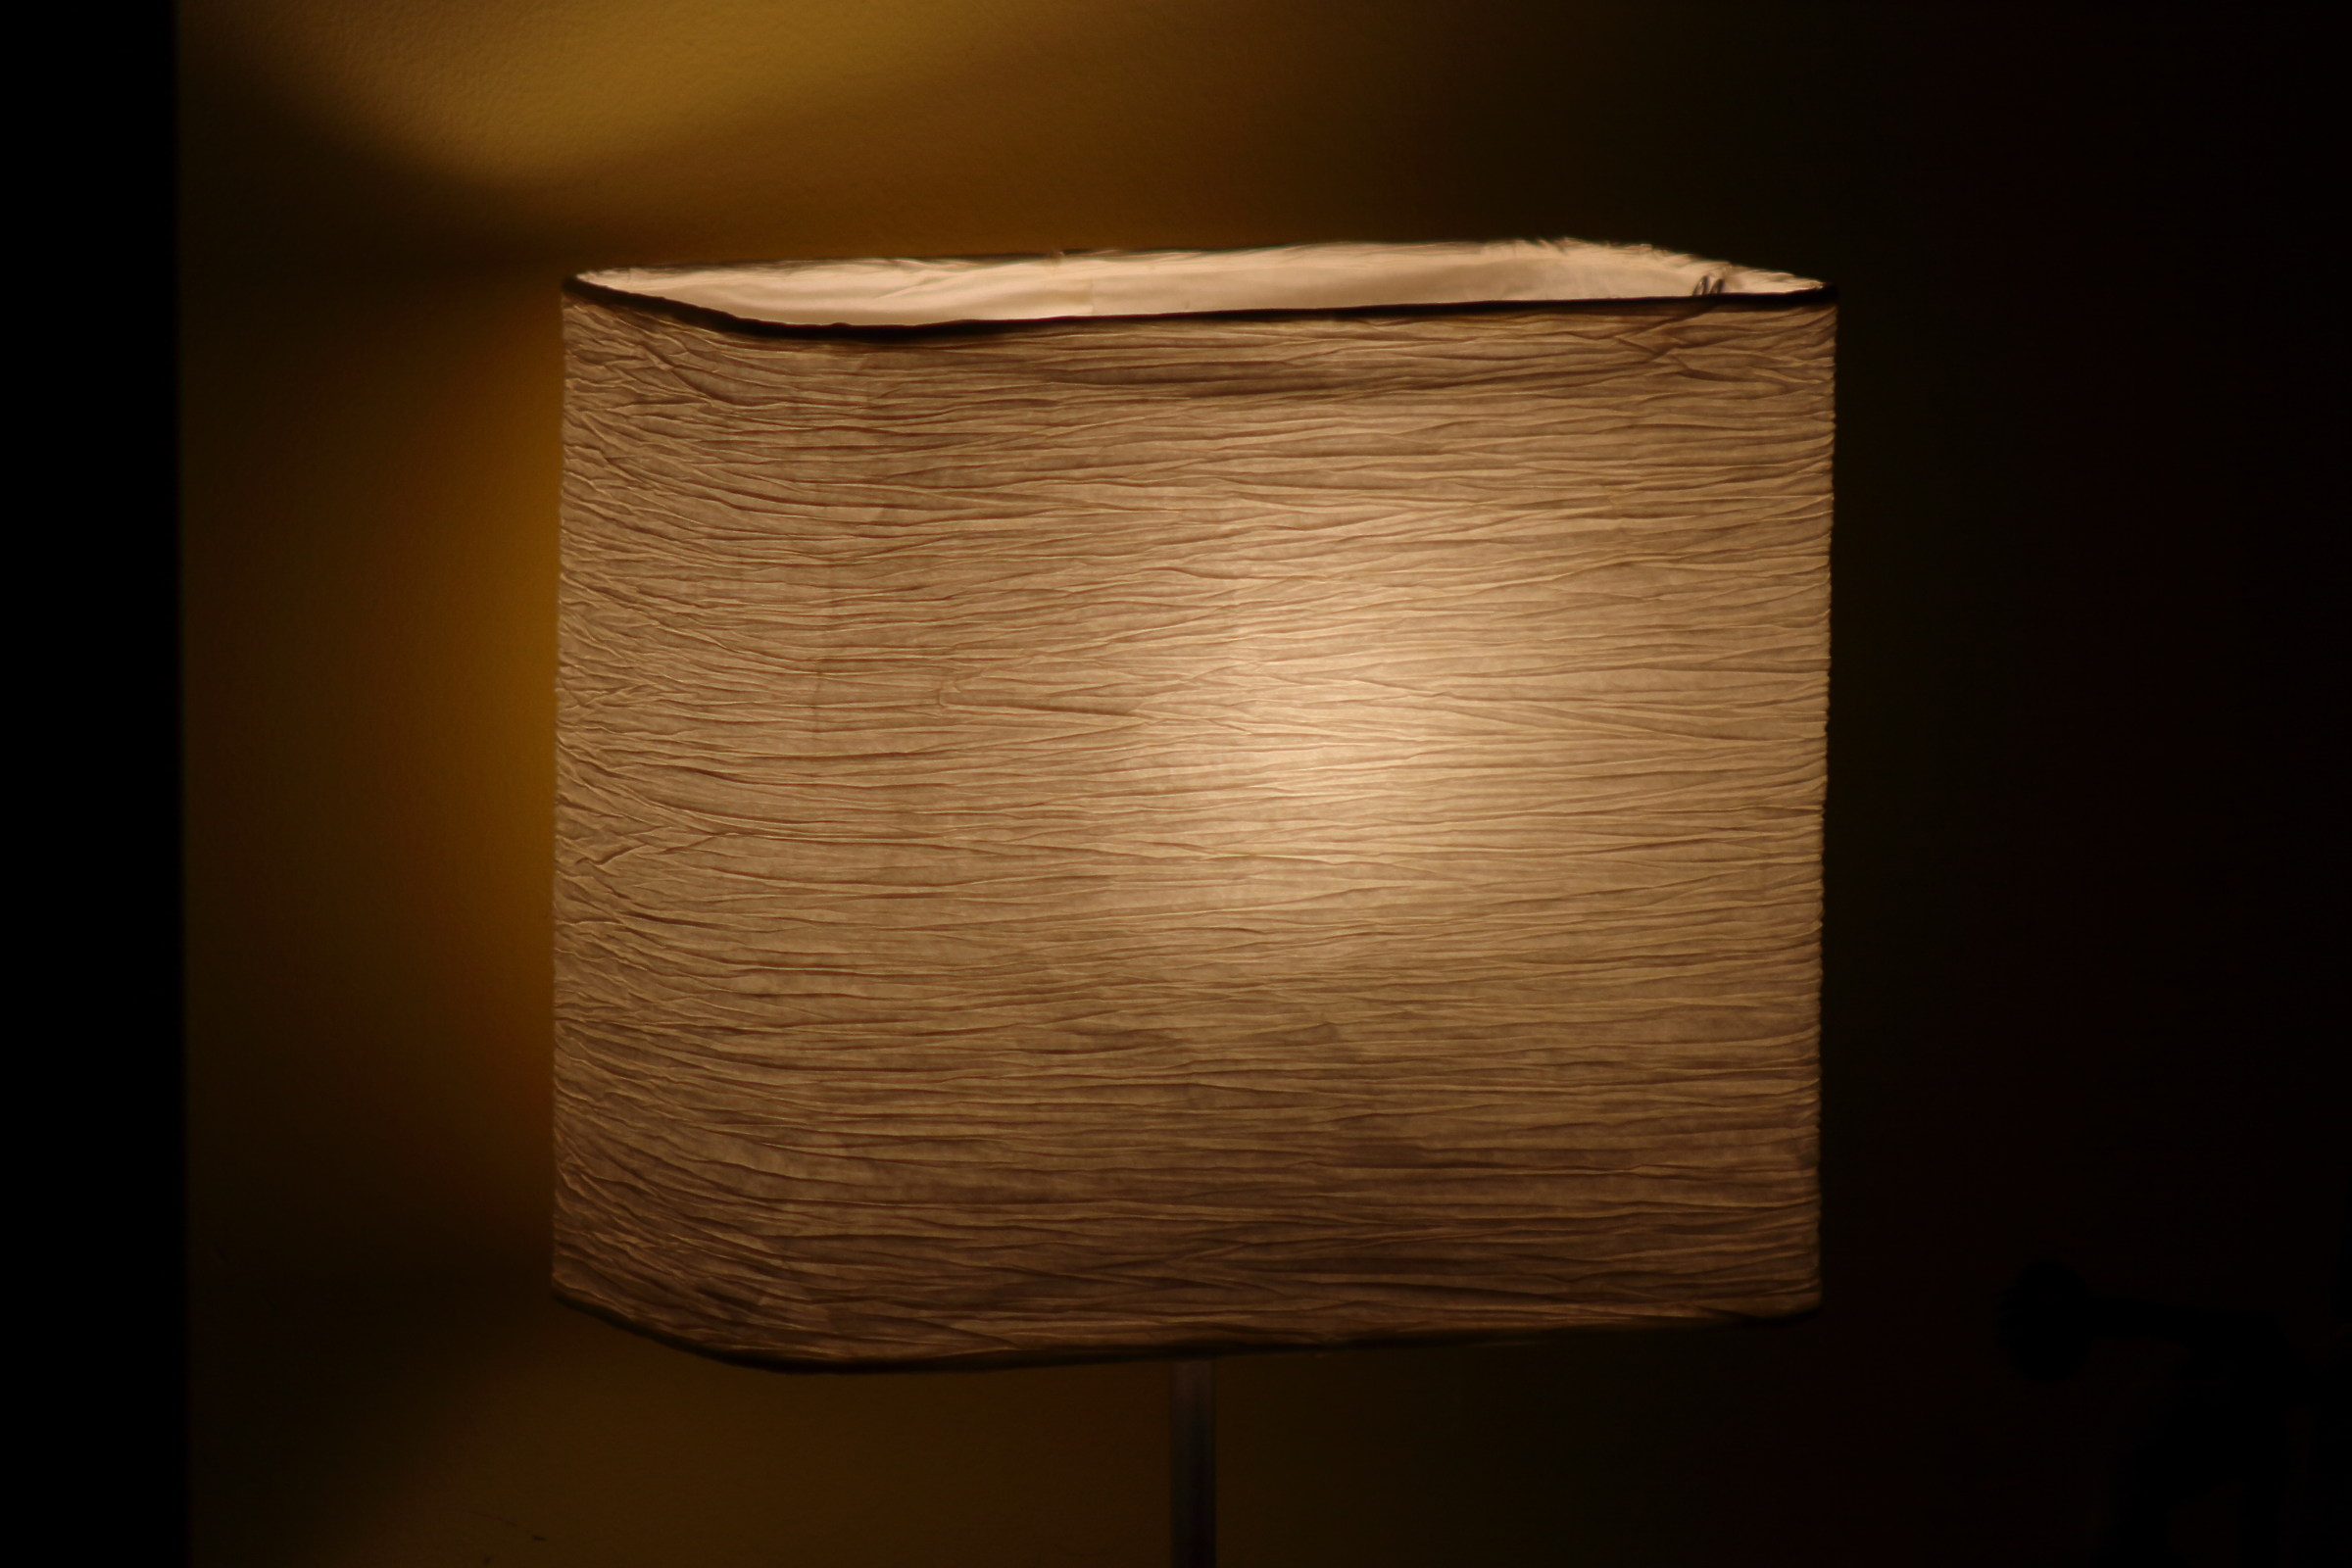 Table lamp, very poor light...